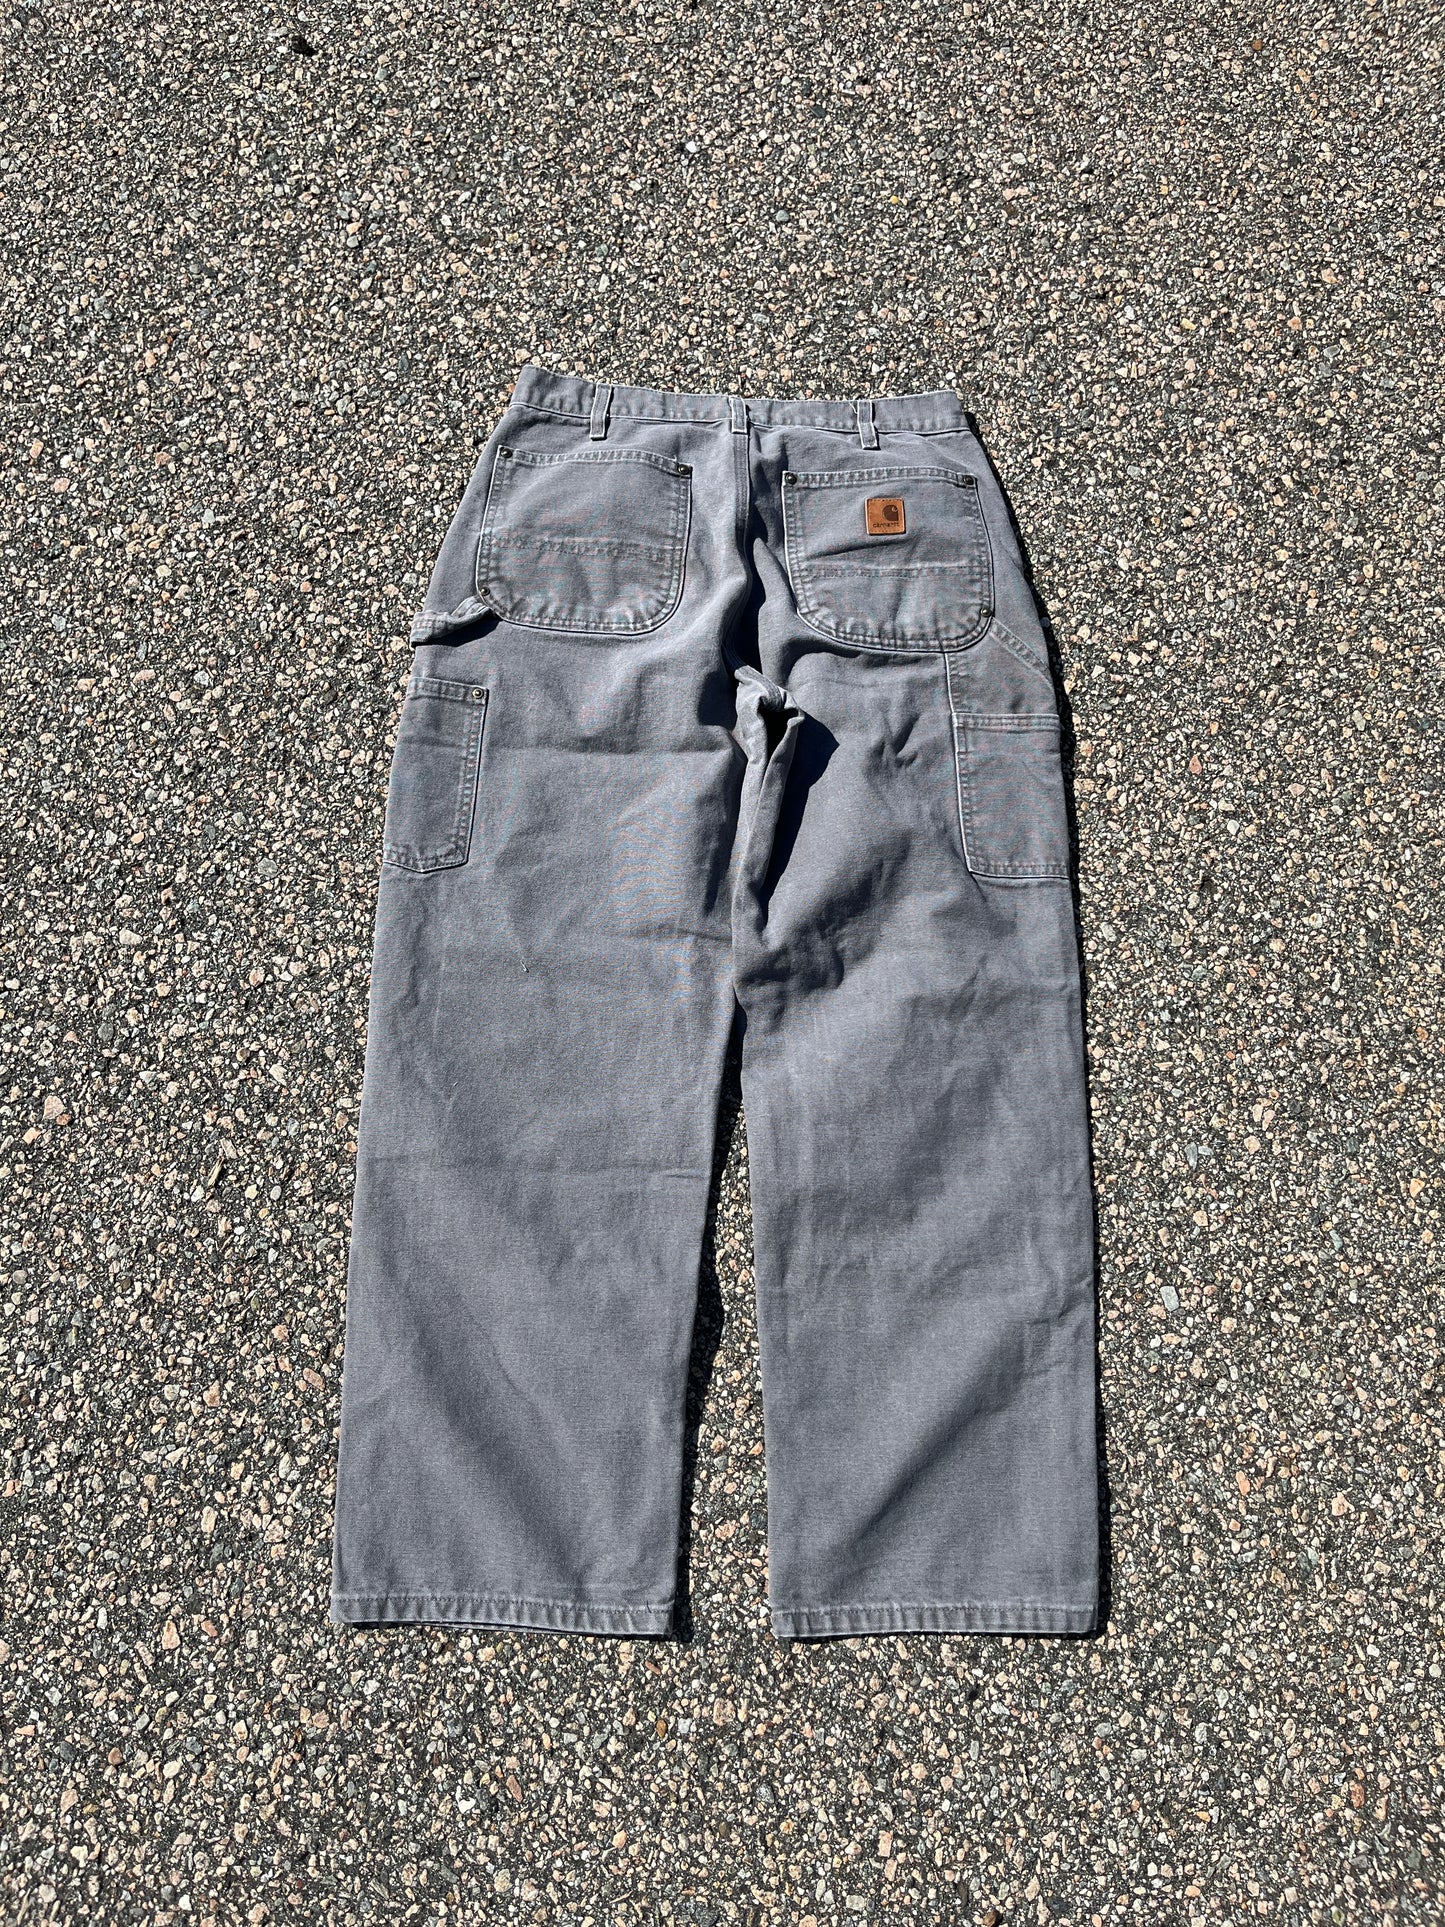 Faded Cement Grey Carhartt Double Knee Pants - 30 x 29